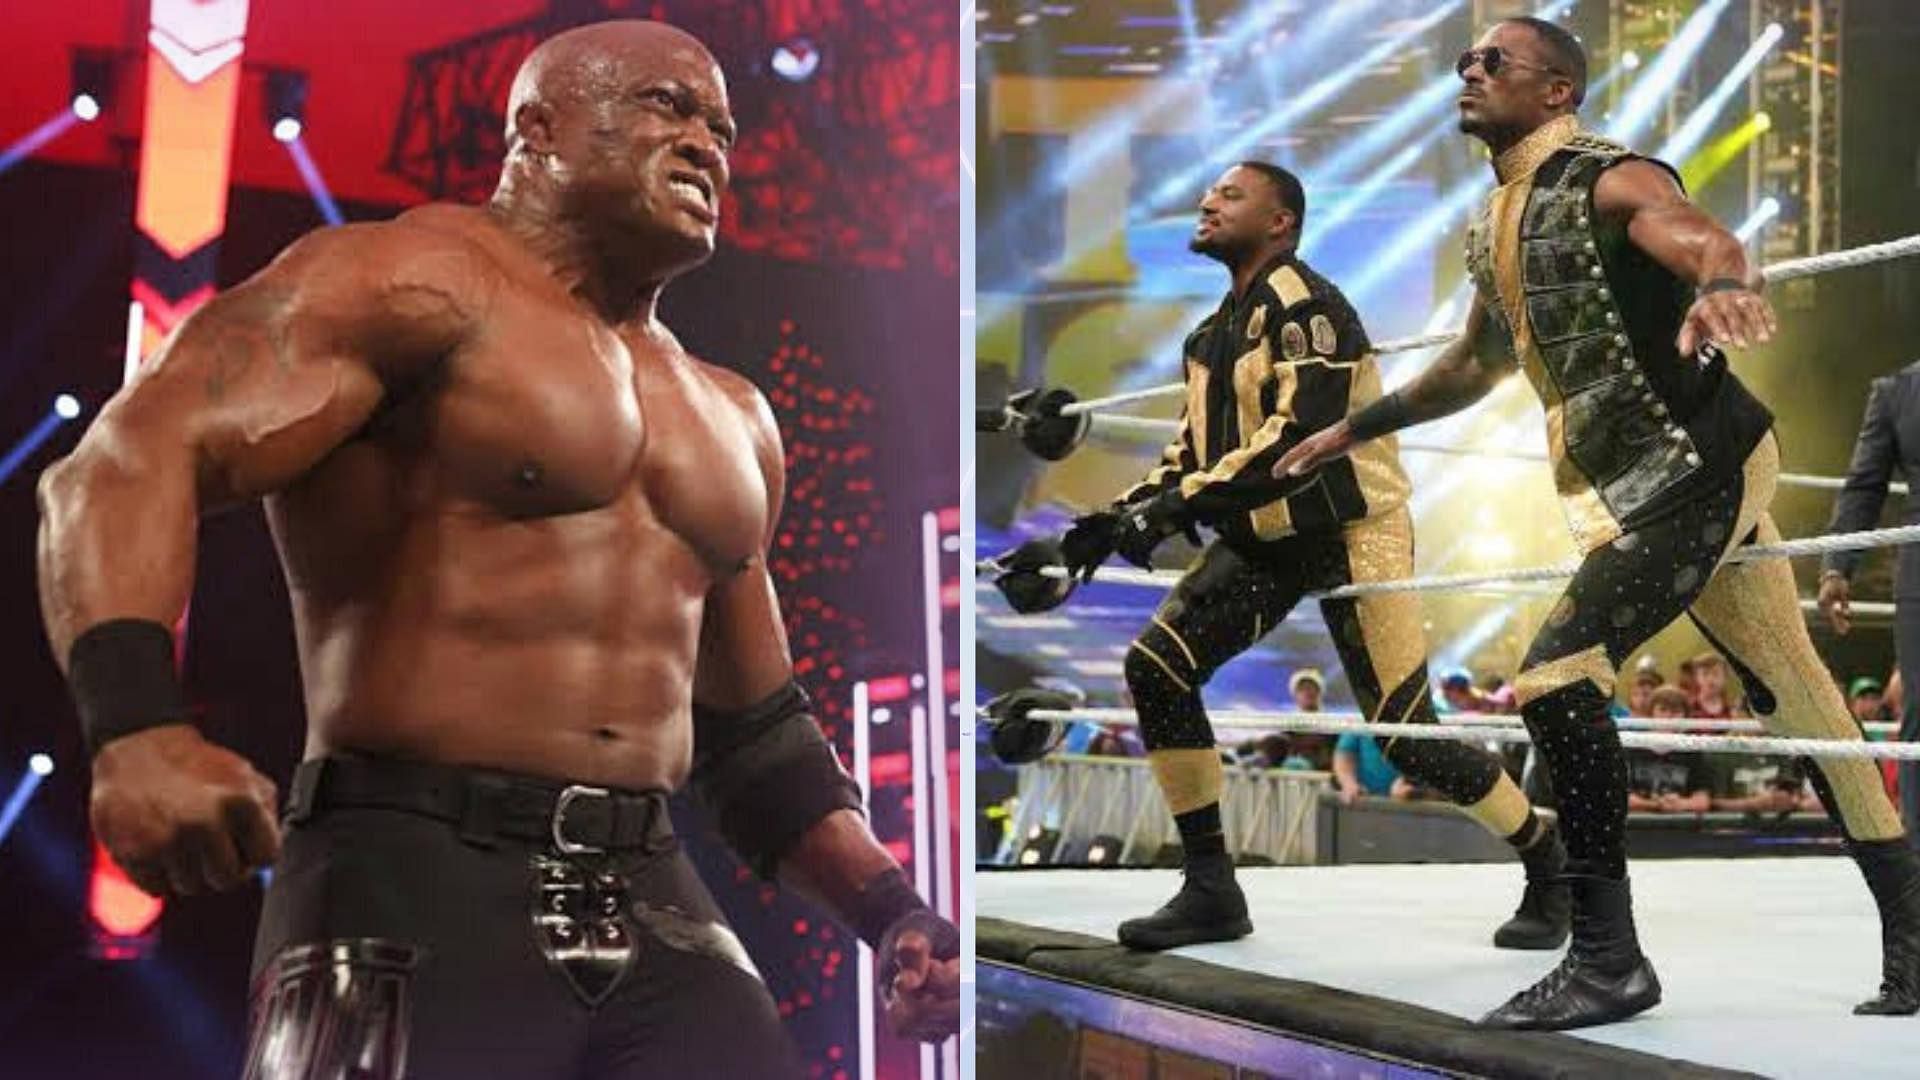 Bobby Lashley and The Street Profits could recruit a new WWE star